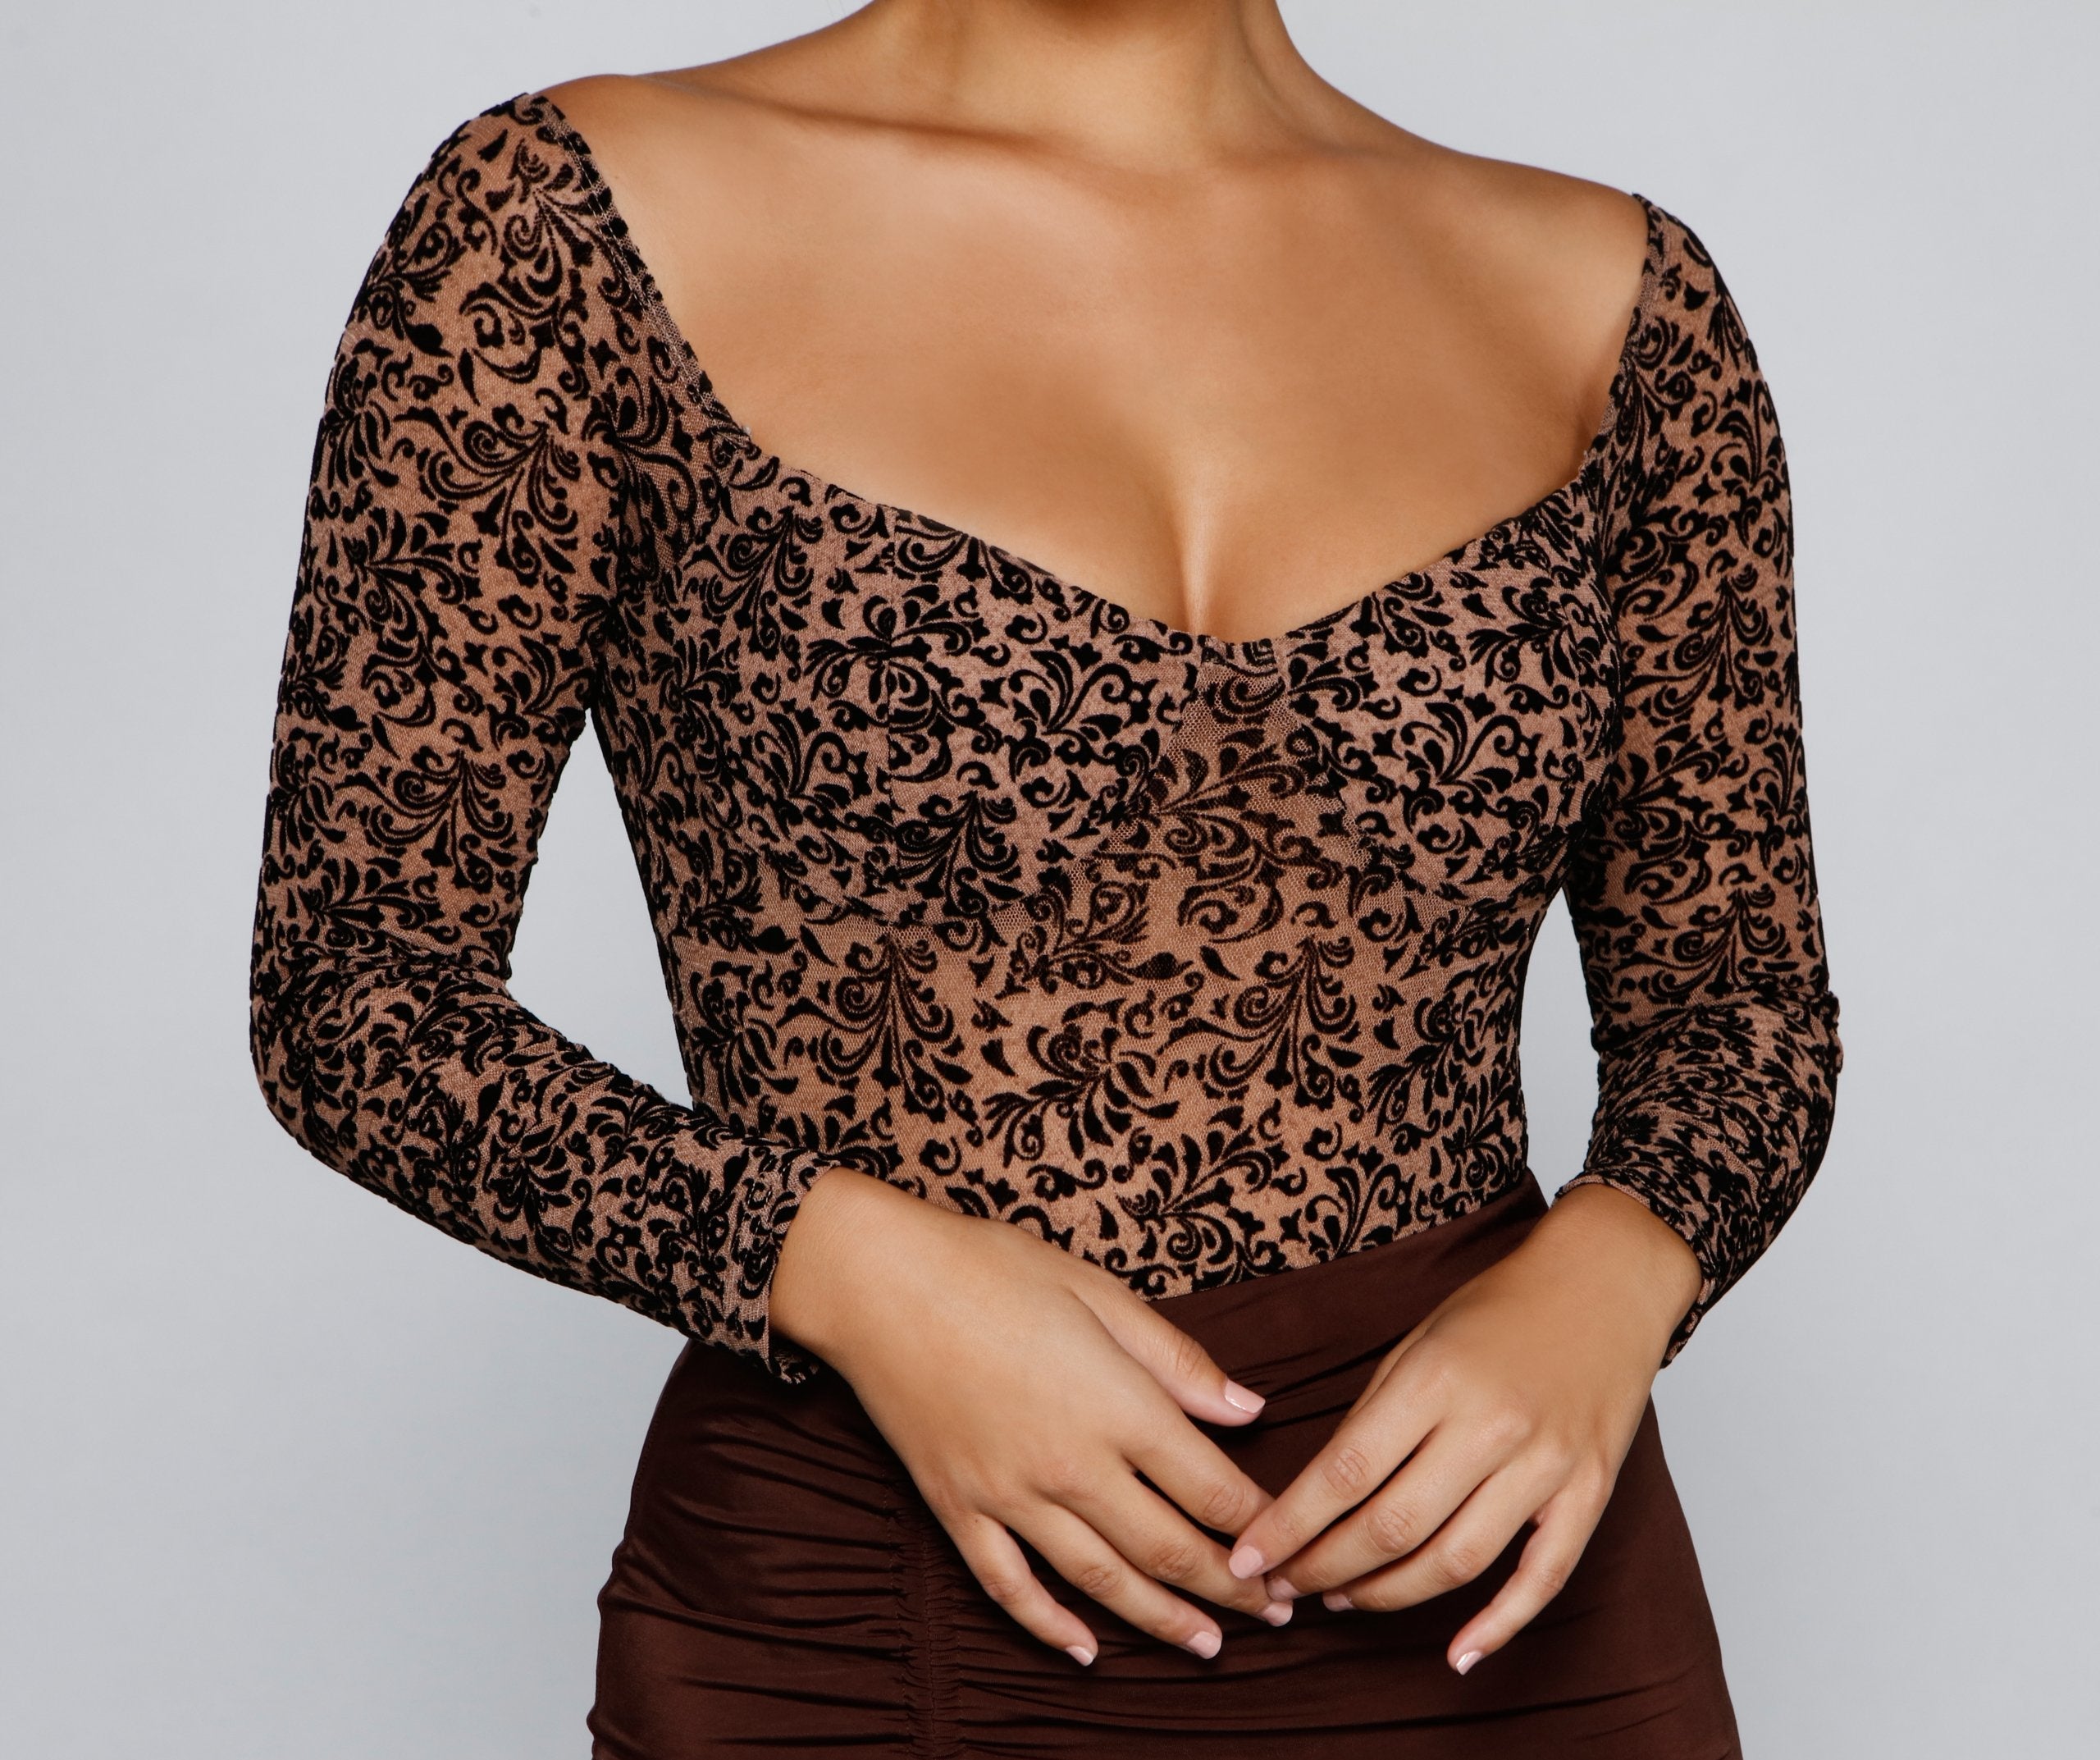 Sultry Details Bustier Bodysuit - Lady Occasions